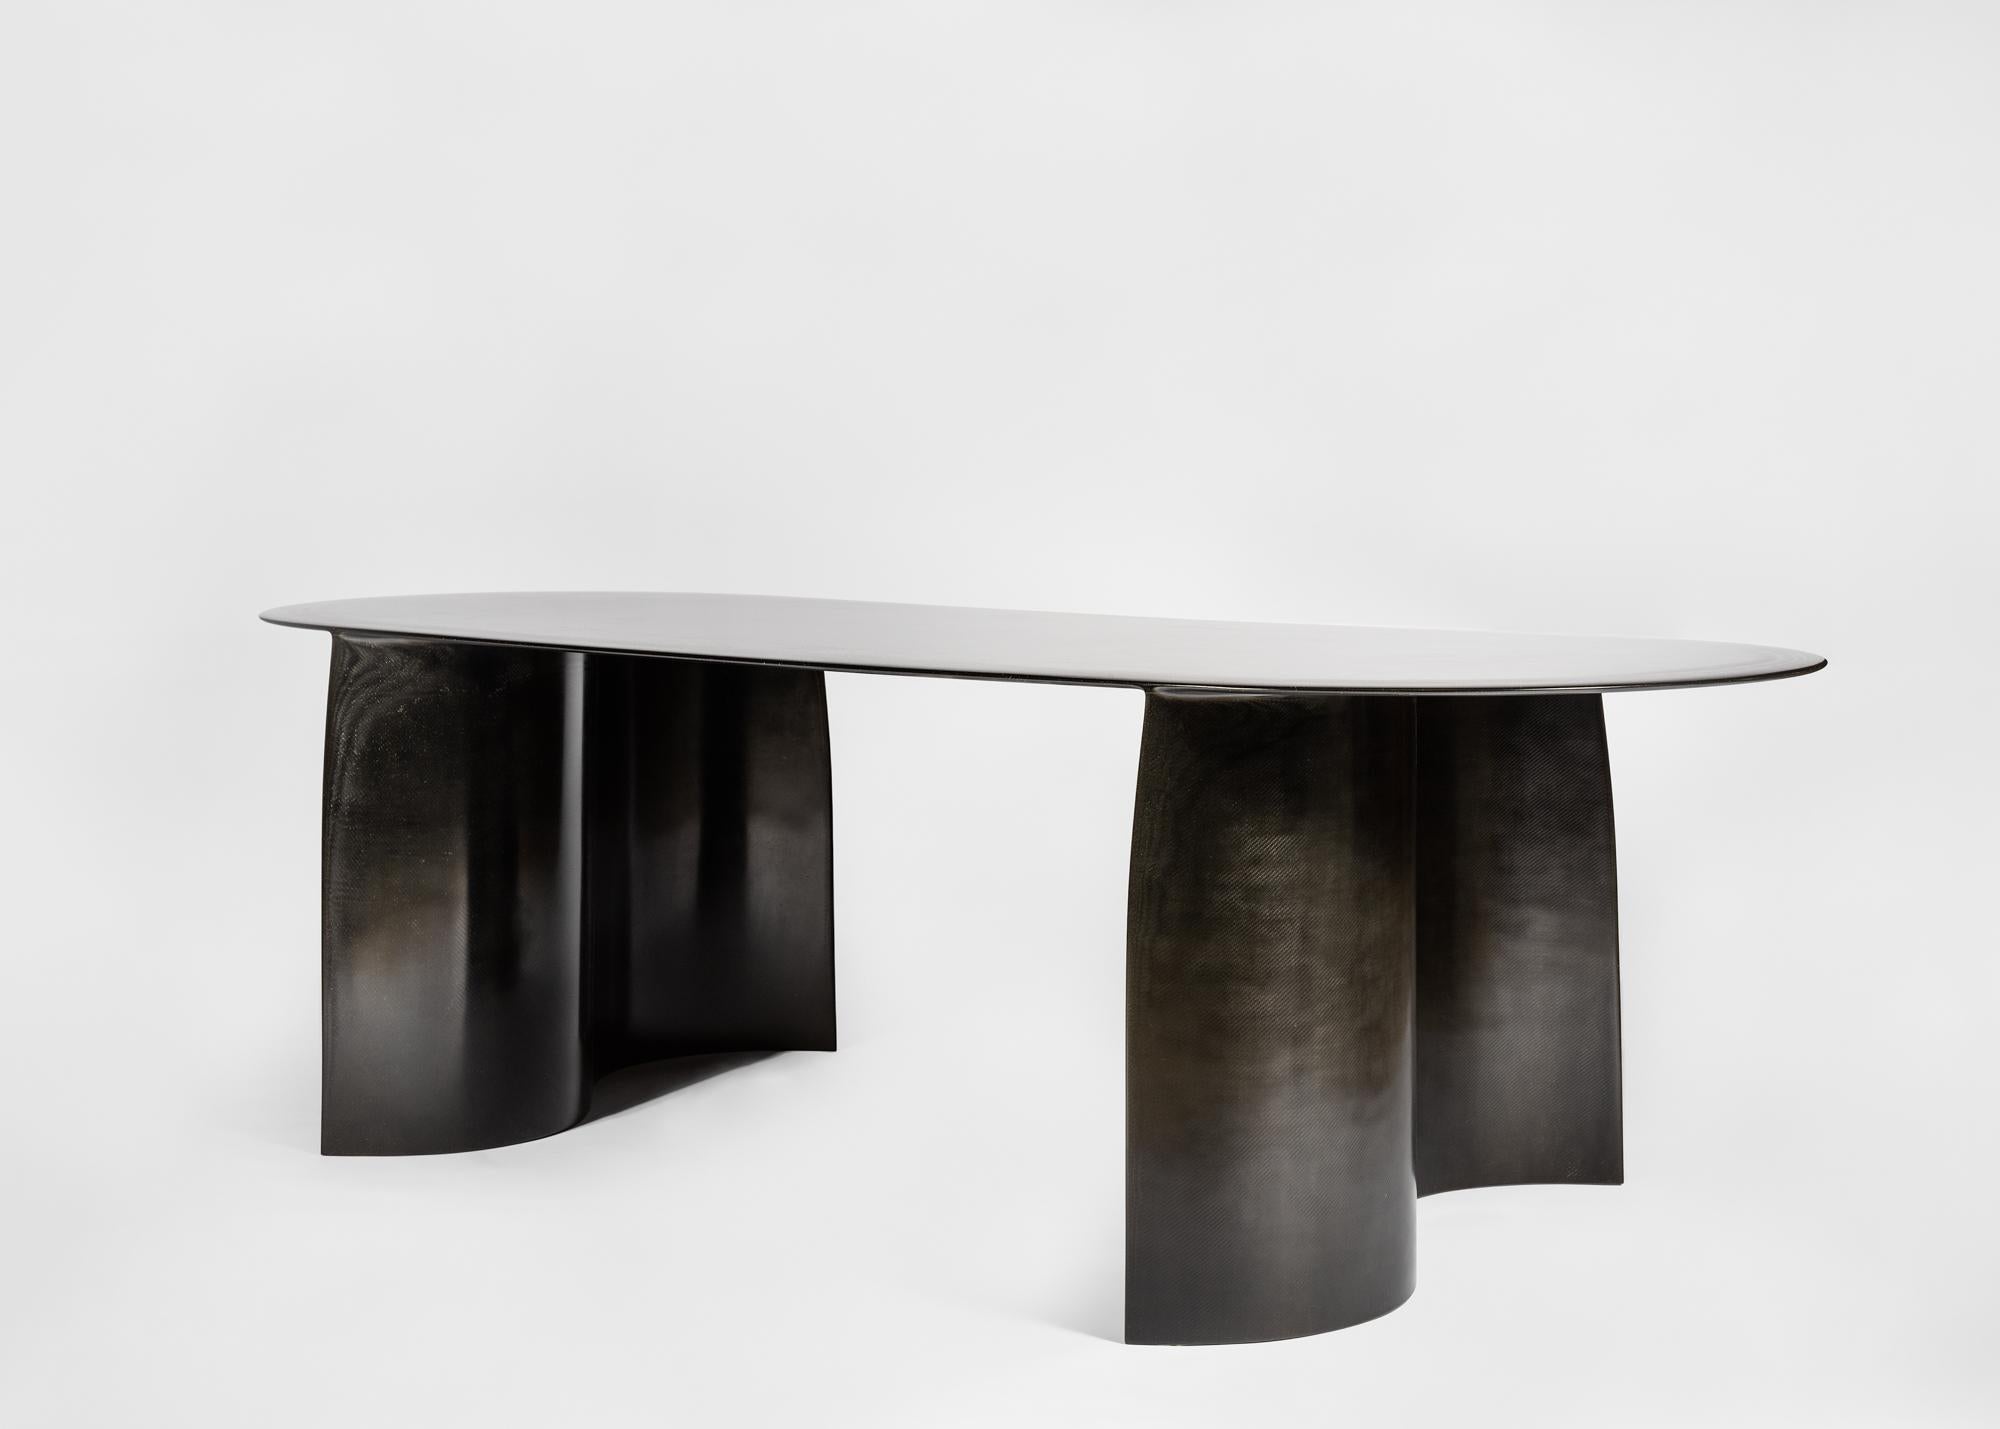 The New Wave Dining Table by STUDIO LUKAS COBER. The New Wave collection illustrates his fascination for oceans force. They are built by hand-layering numerous layers of fiberglass cloth with resin into desired shapes. After combining the shapes and